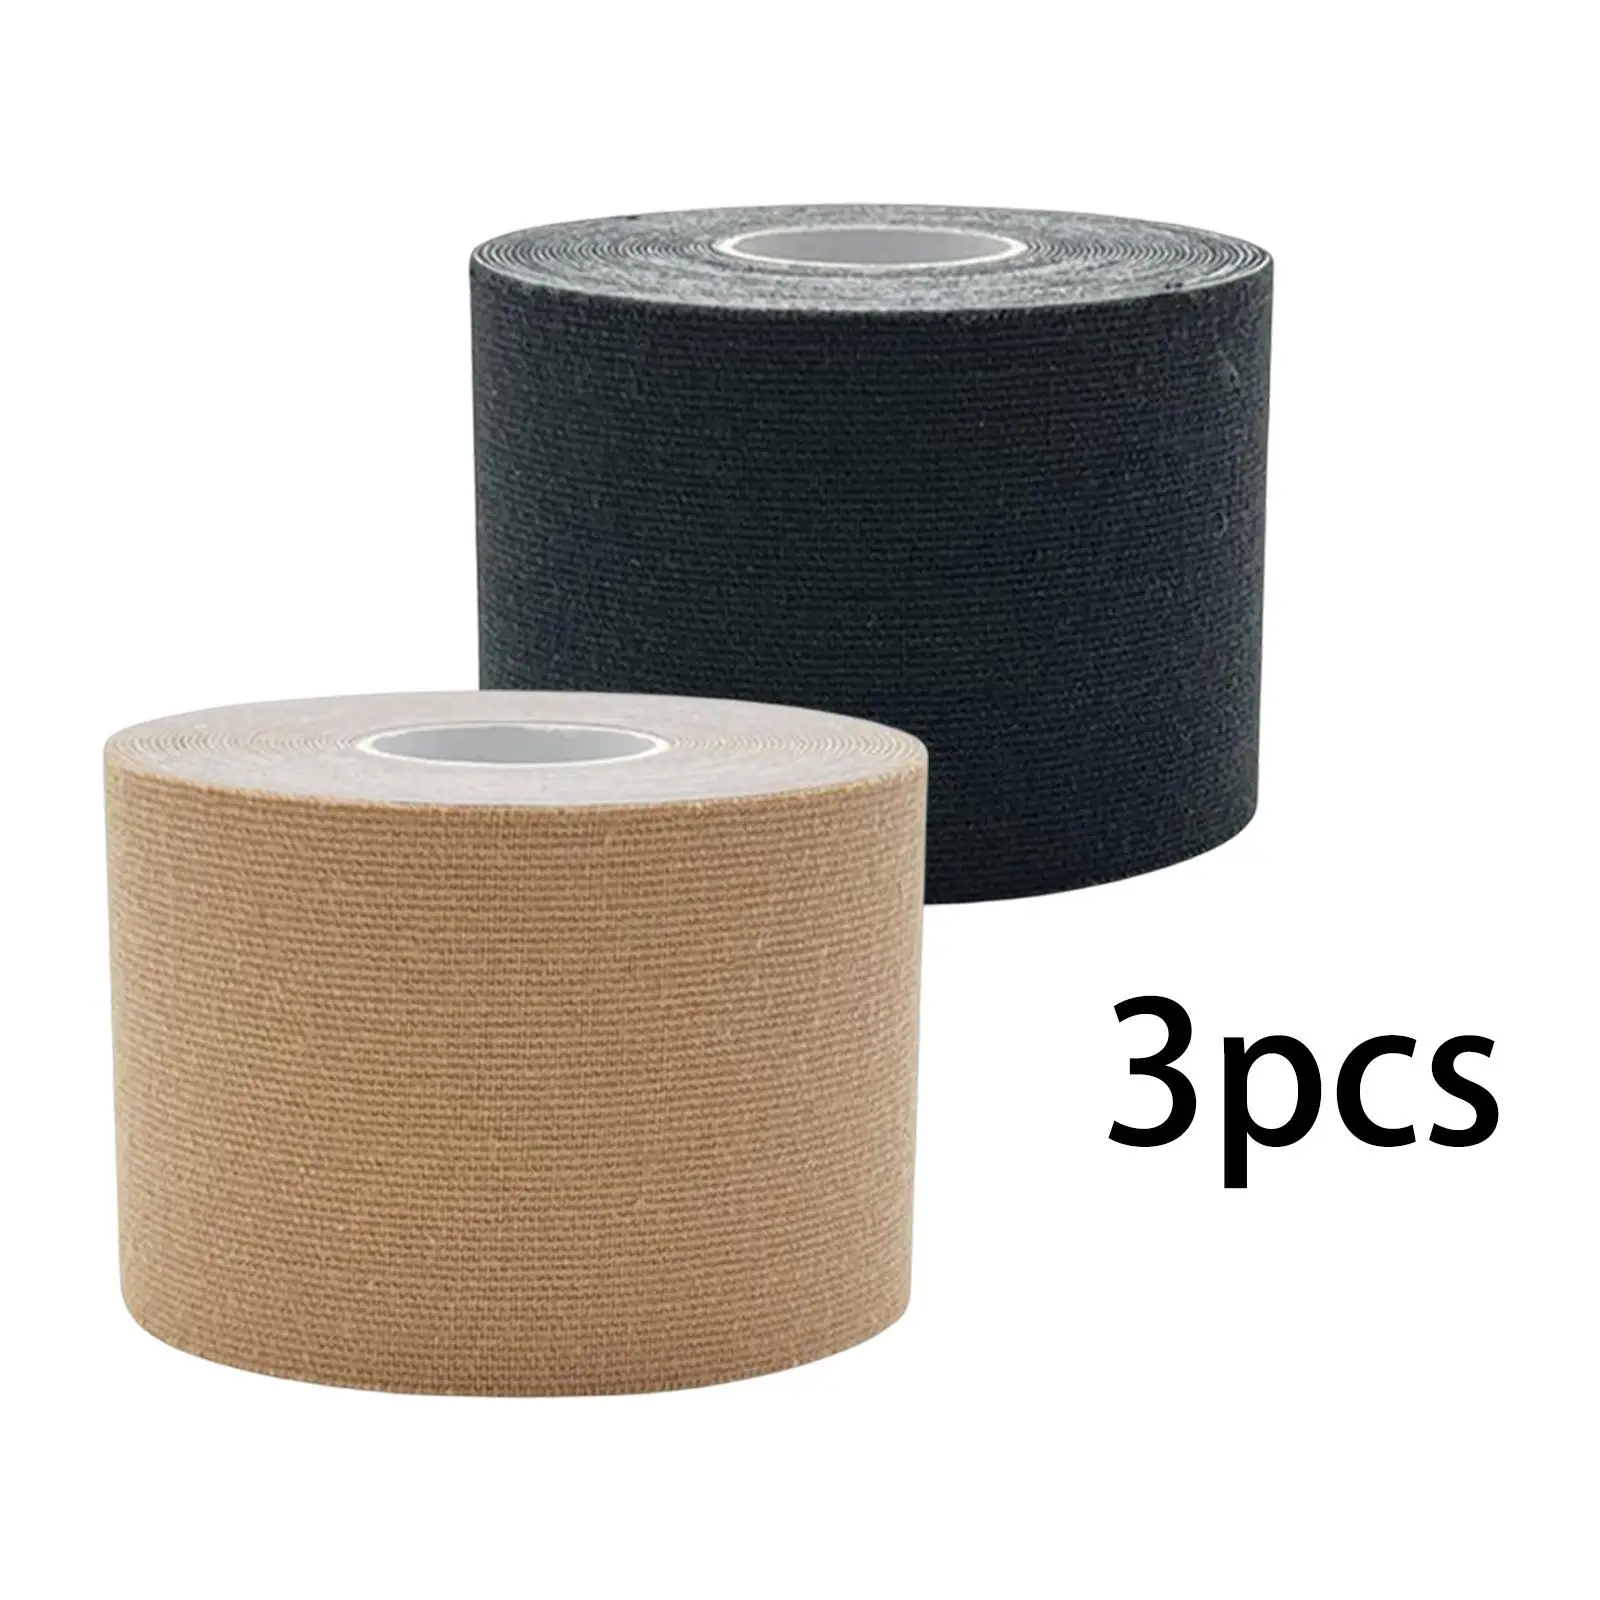 3Pcs 3Cmx5M Tape for Sports Muscle Support with Buttons Breathable Lifting Tape Elastic for Shoulder Knee Chest Running Tennis